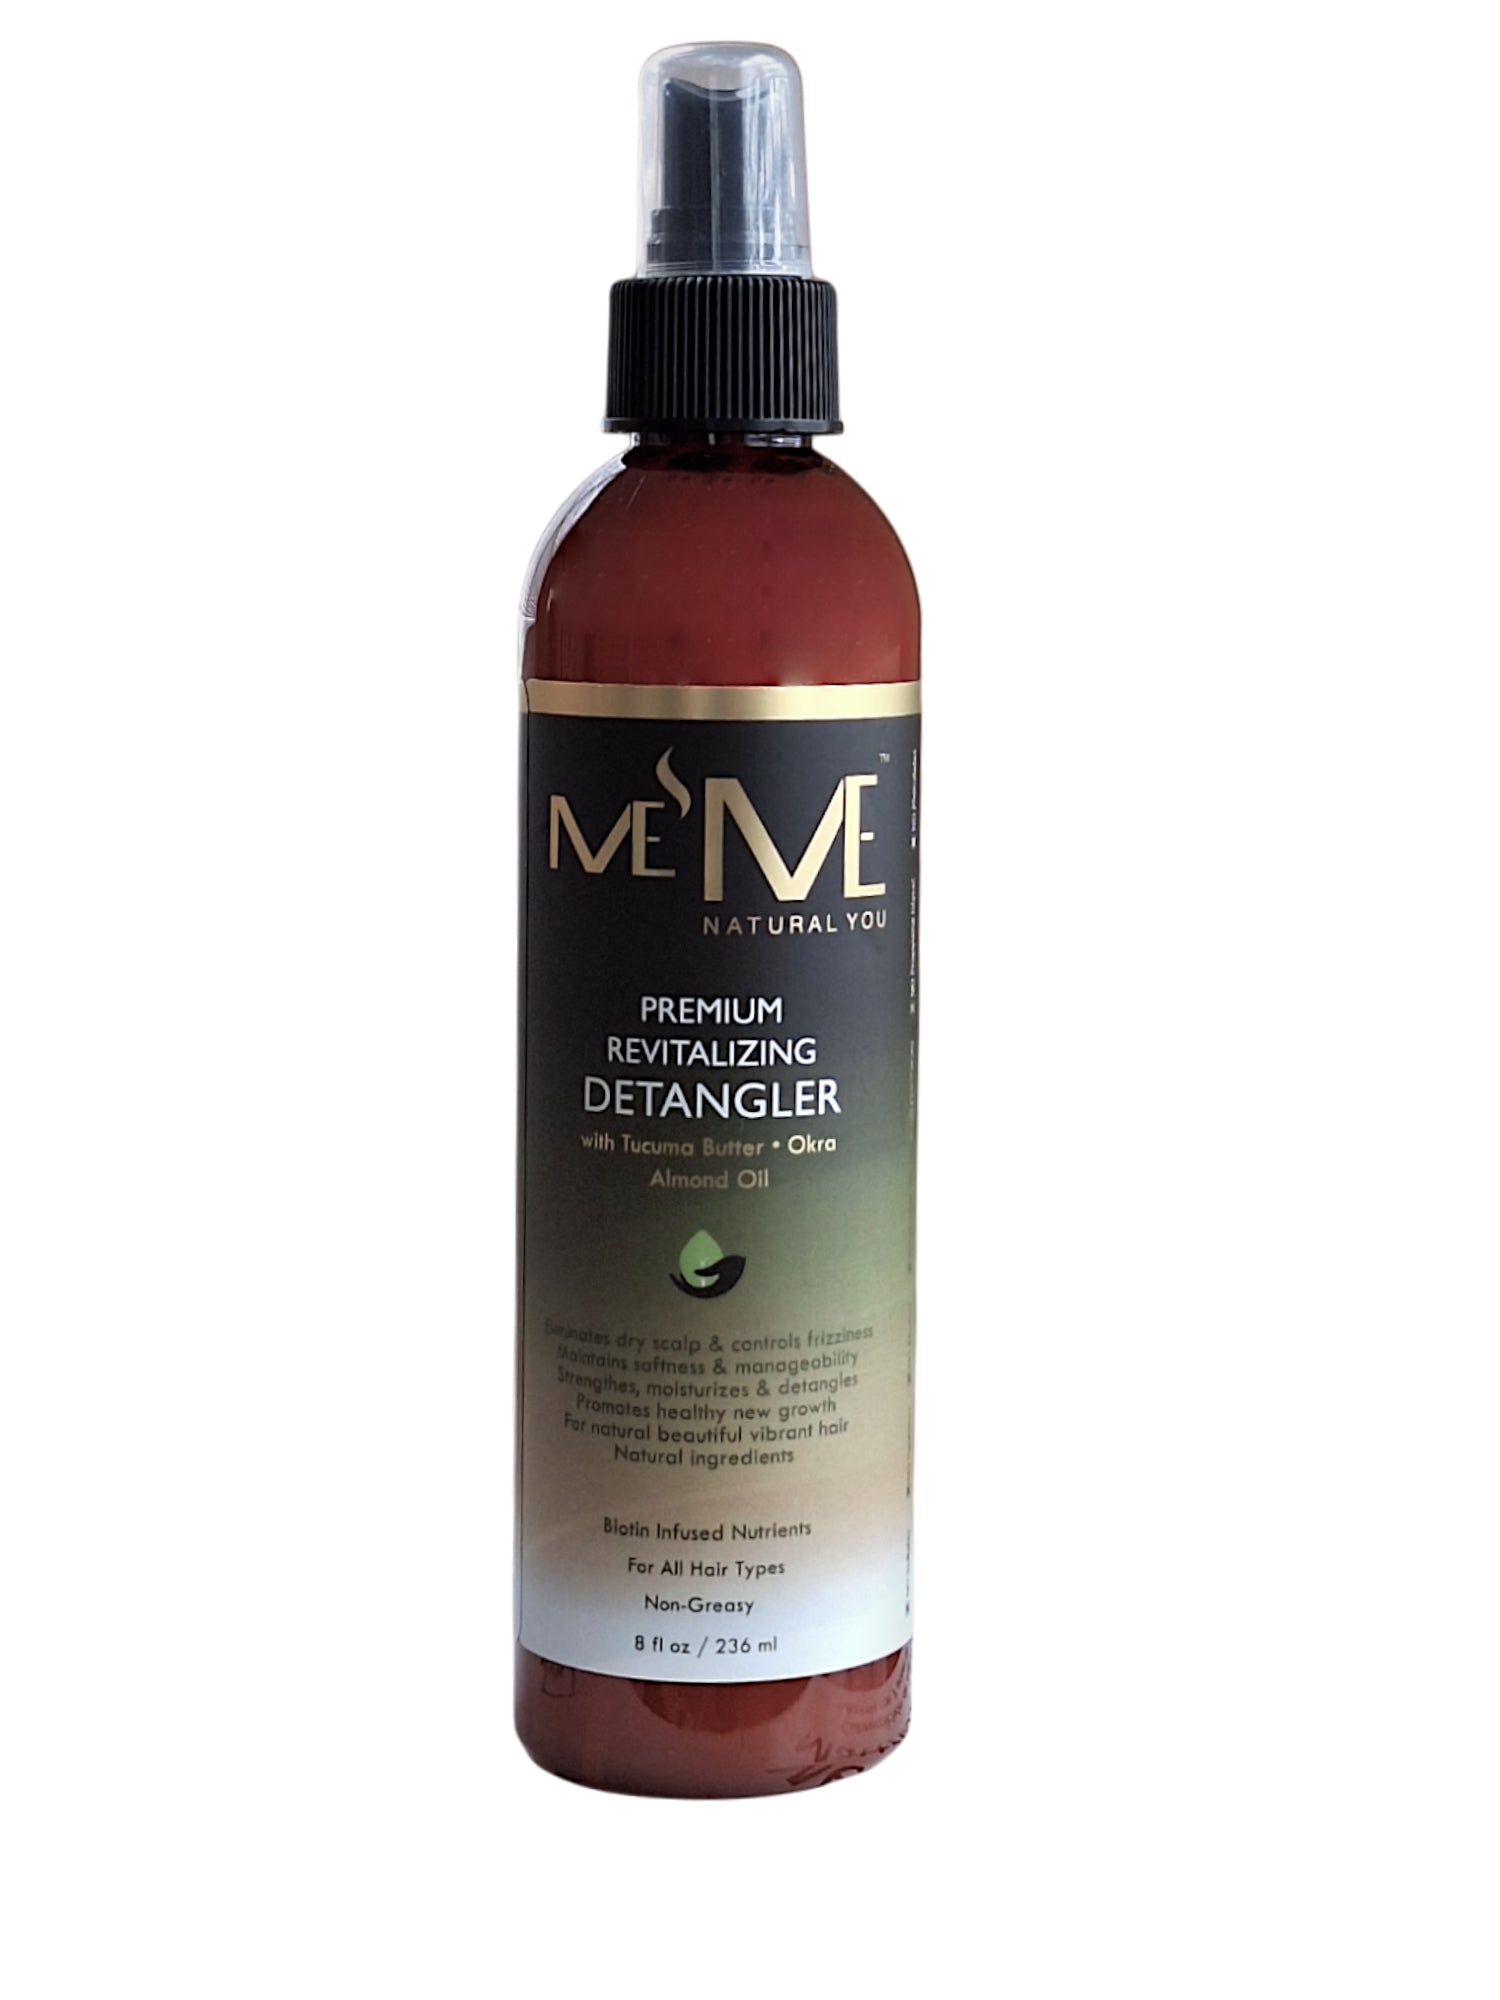 Say Goodbye to Knots and Tangles with Me'me Natural You's Premium Revitalizing Detangler!  8.0 oz